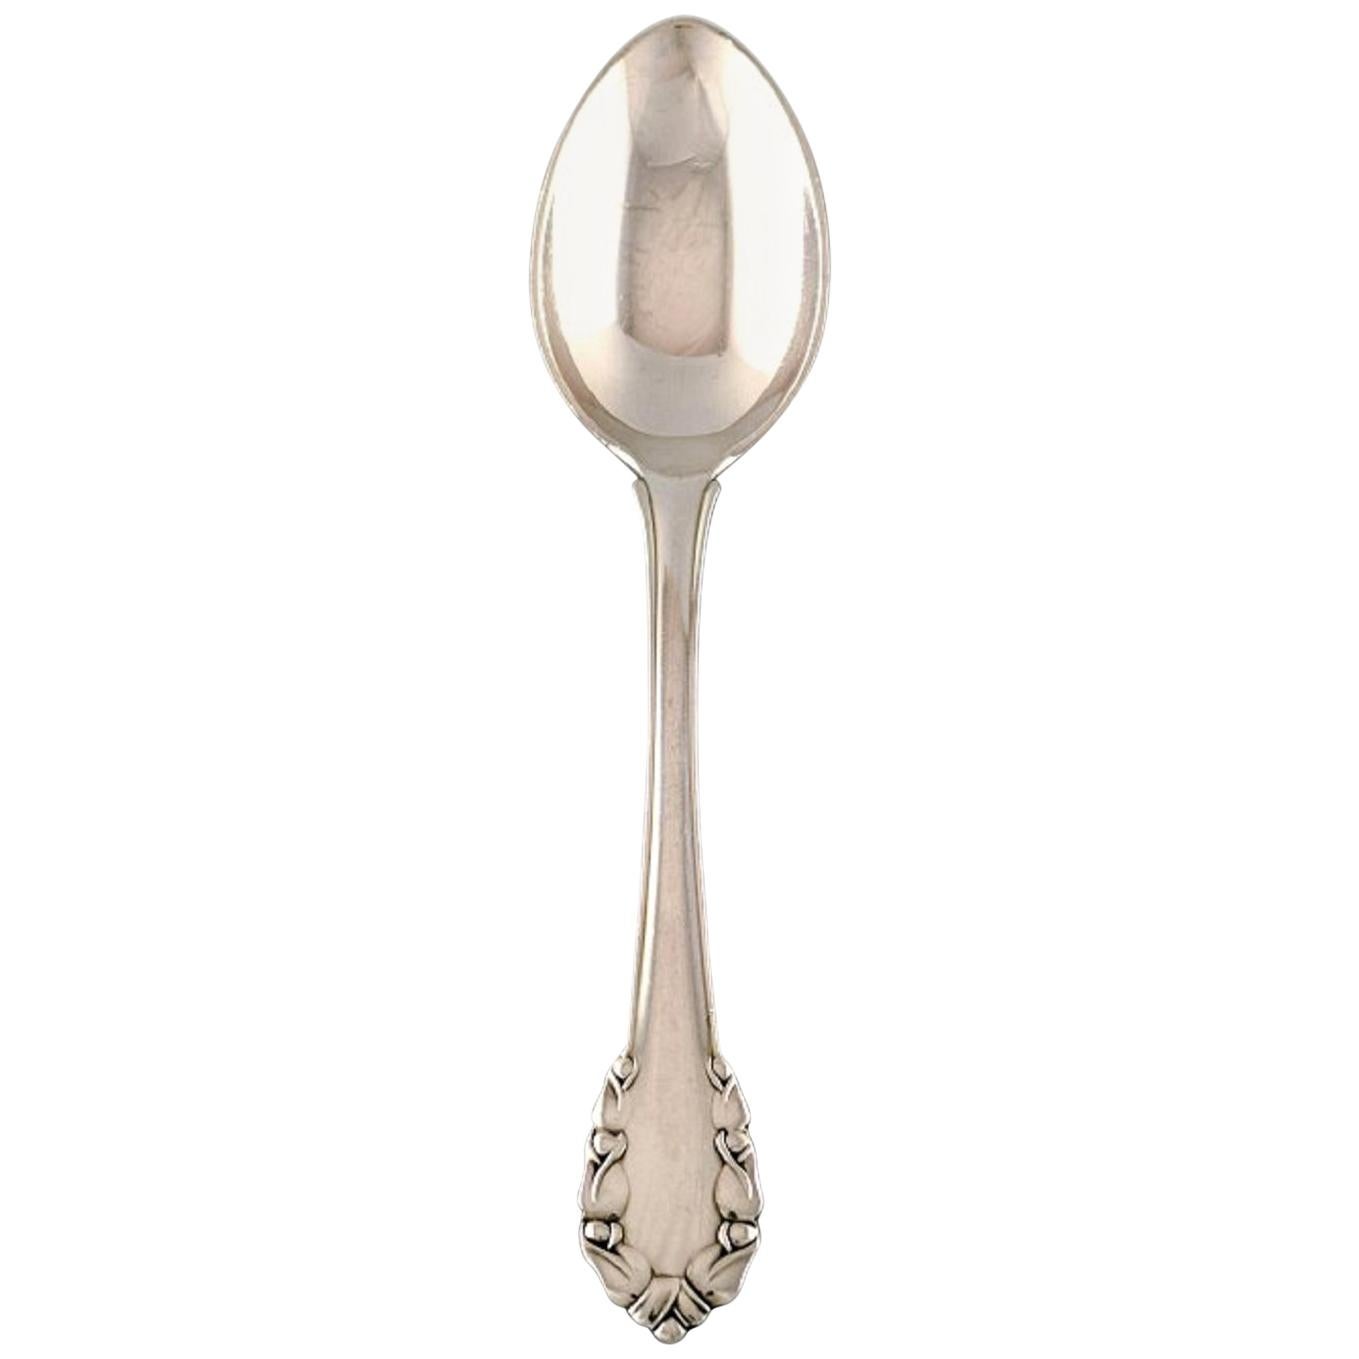 Georg Jensen "Lily of the valley" Child Spoon in Sterling Silver, 3 Pieces